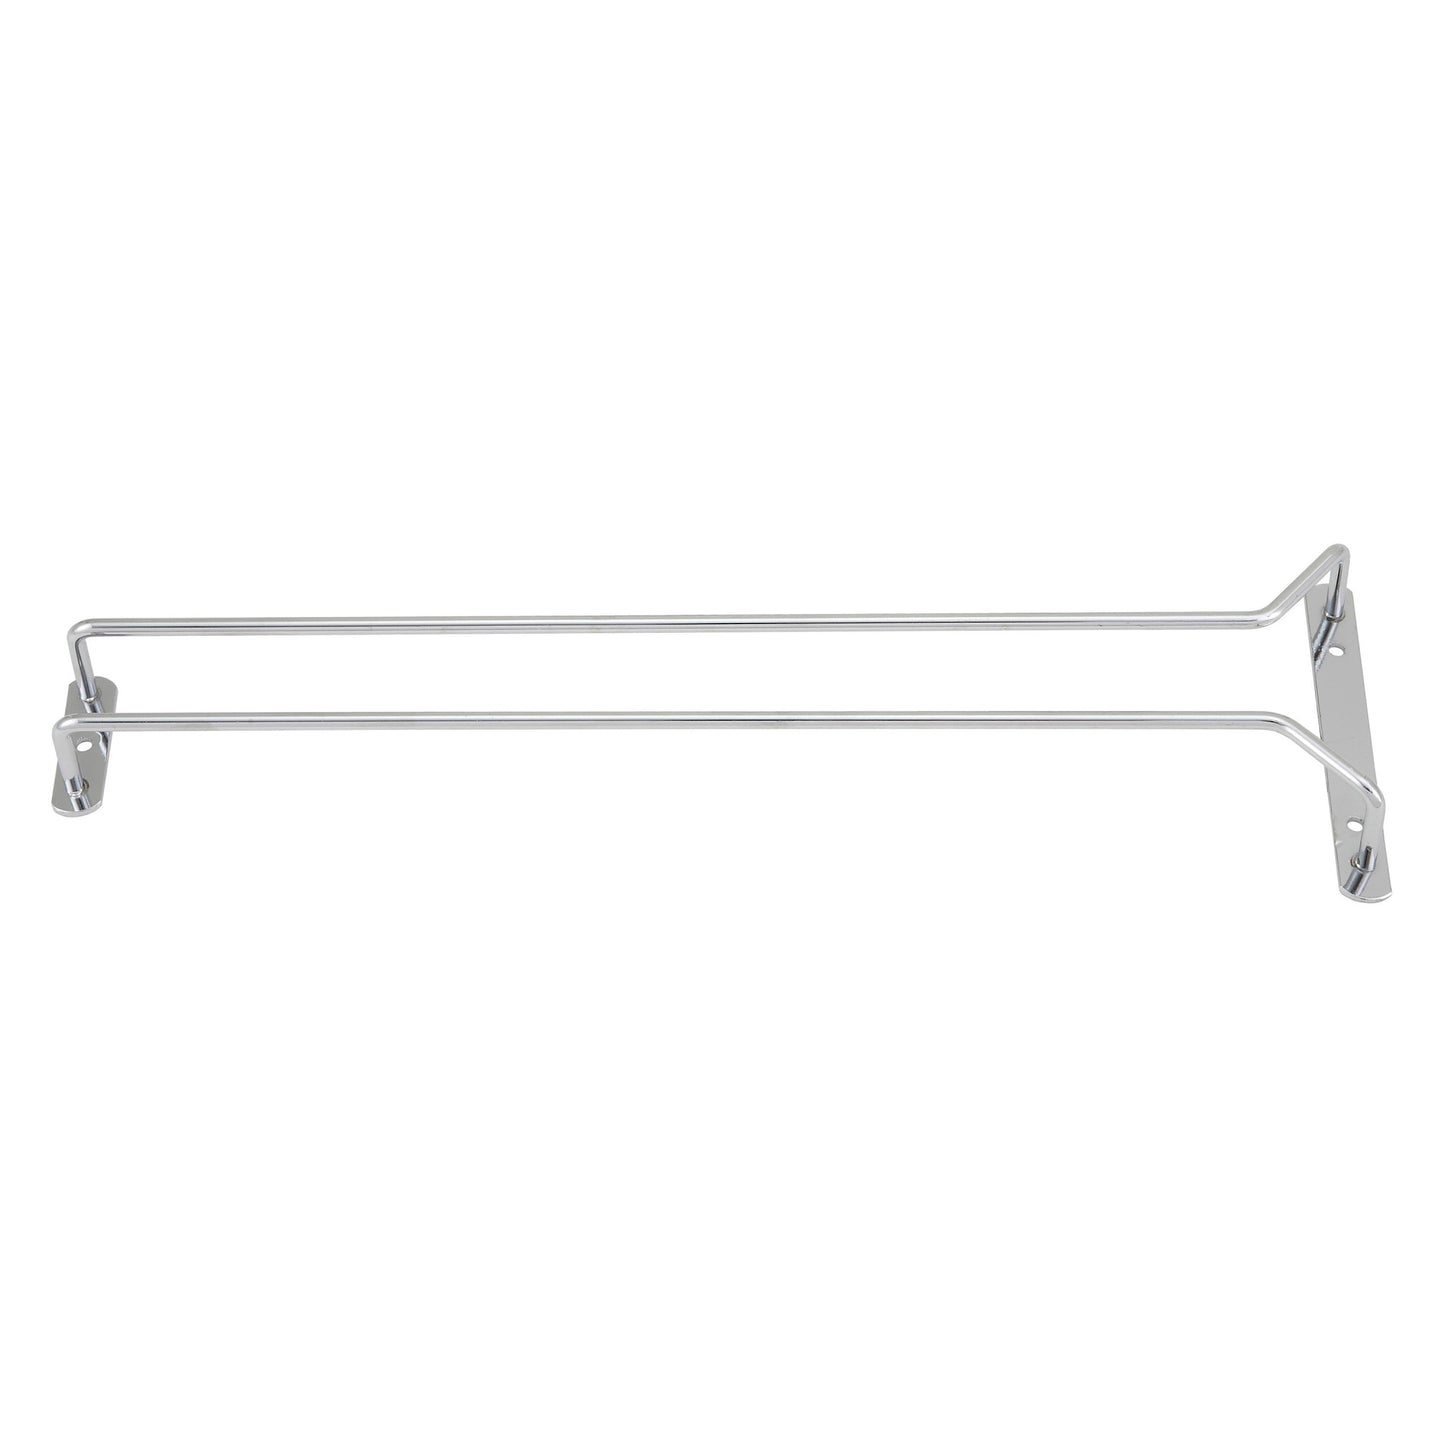 GHC-16 - 16" Wire Single Channel Glass Hanger